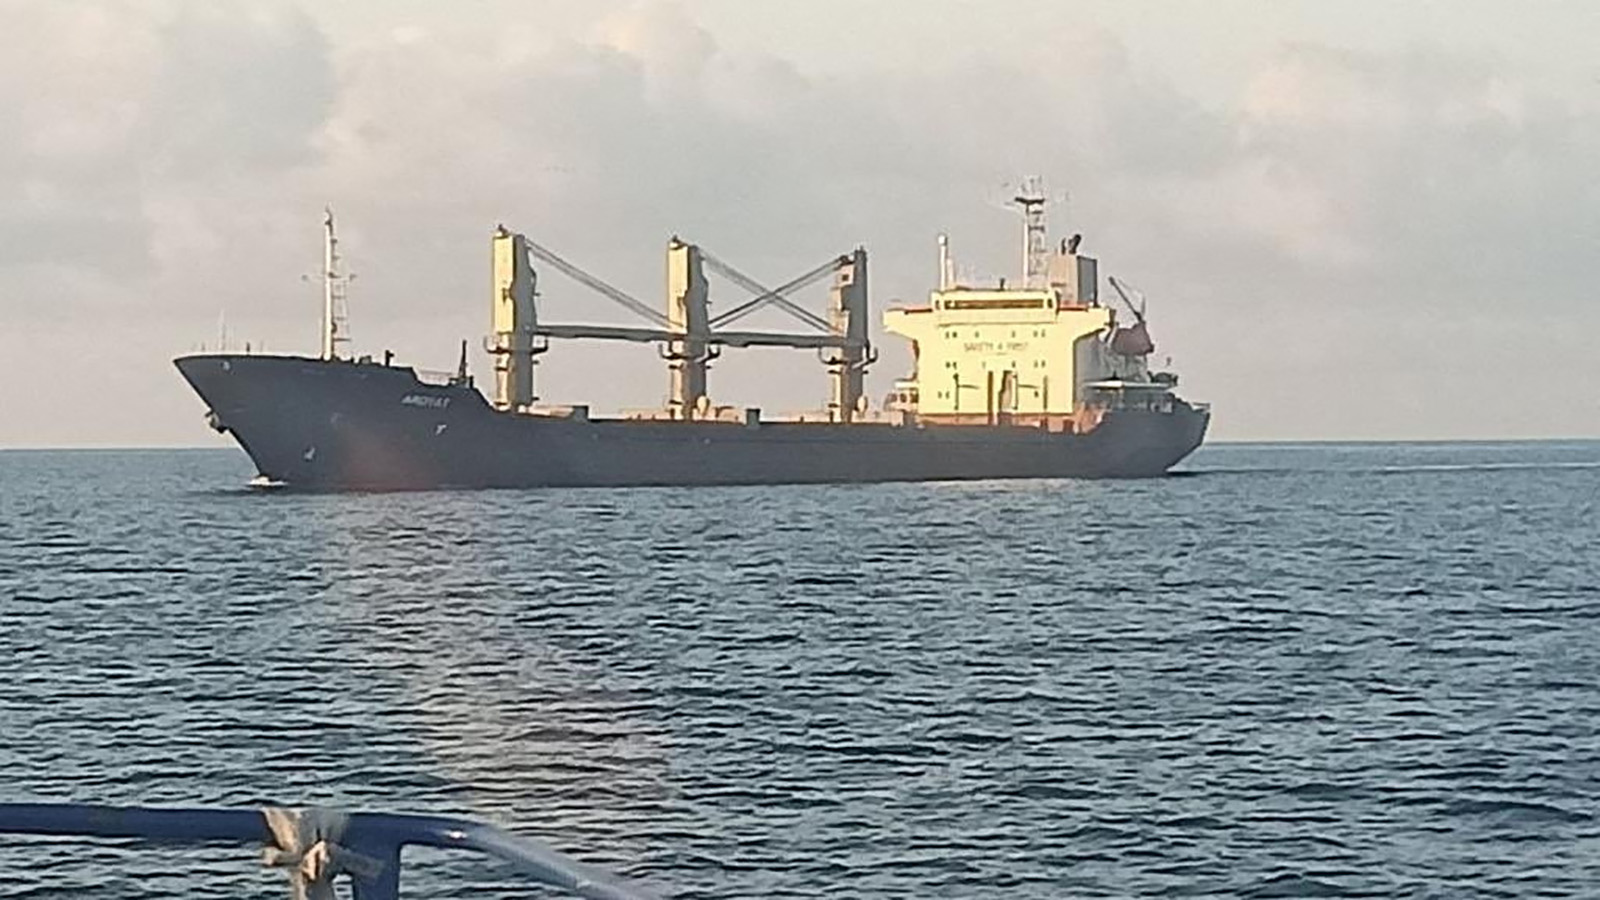 Palau-flagged bulk carrier Aroyat is pictured at sea, in this picture obtained from social media and released on September 22.